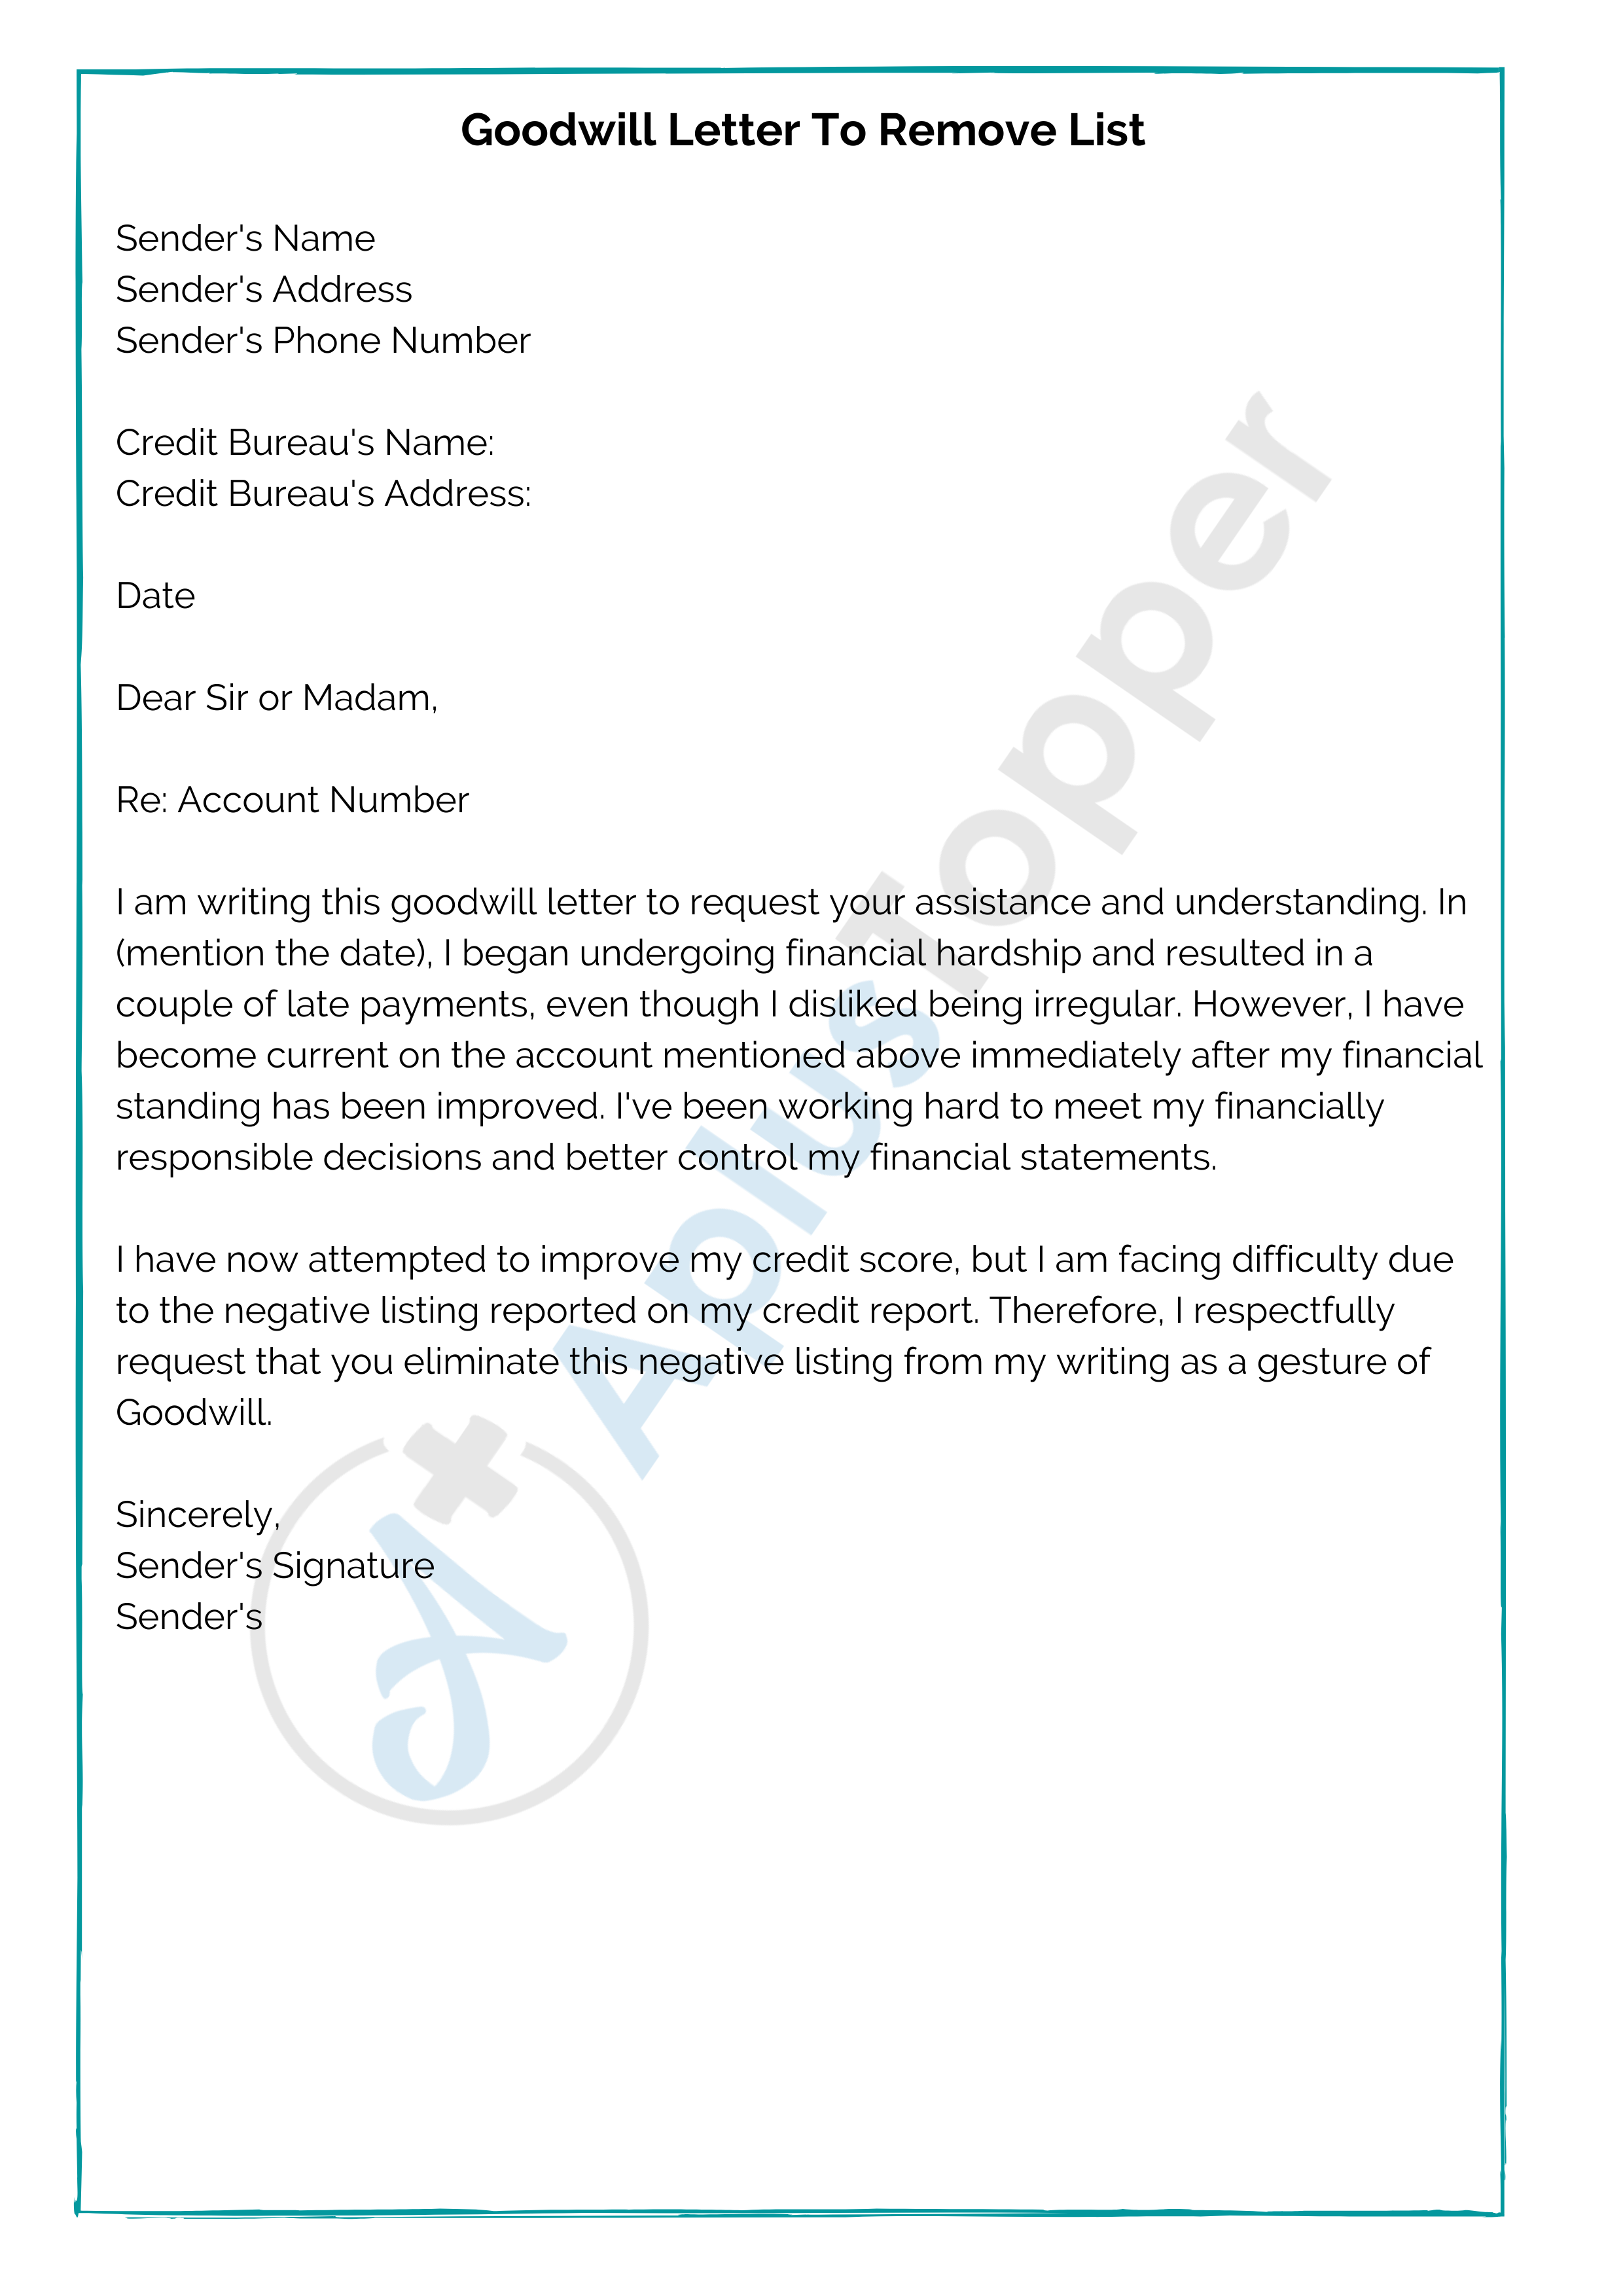 Goodwill Deletion Letter Template